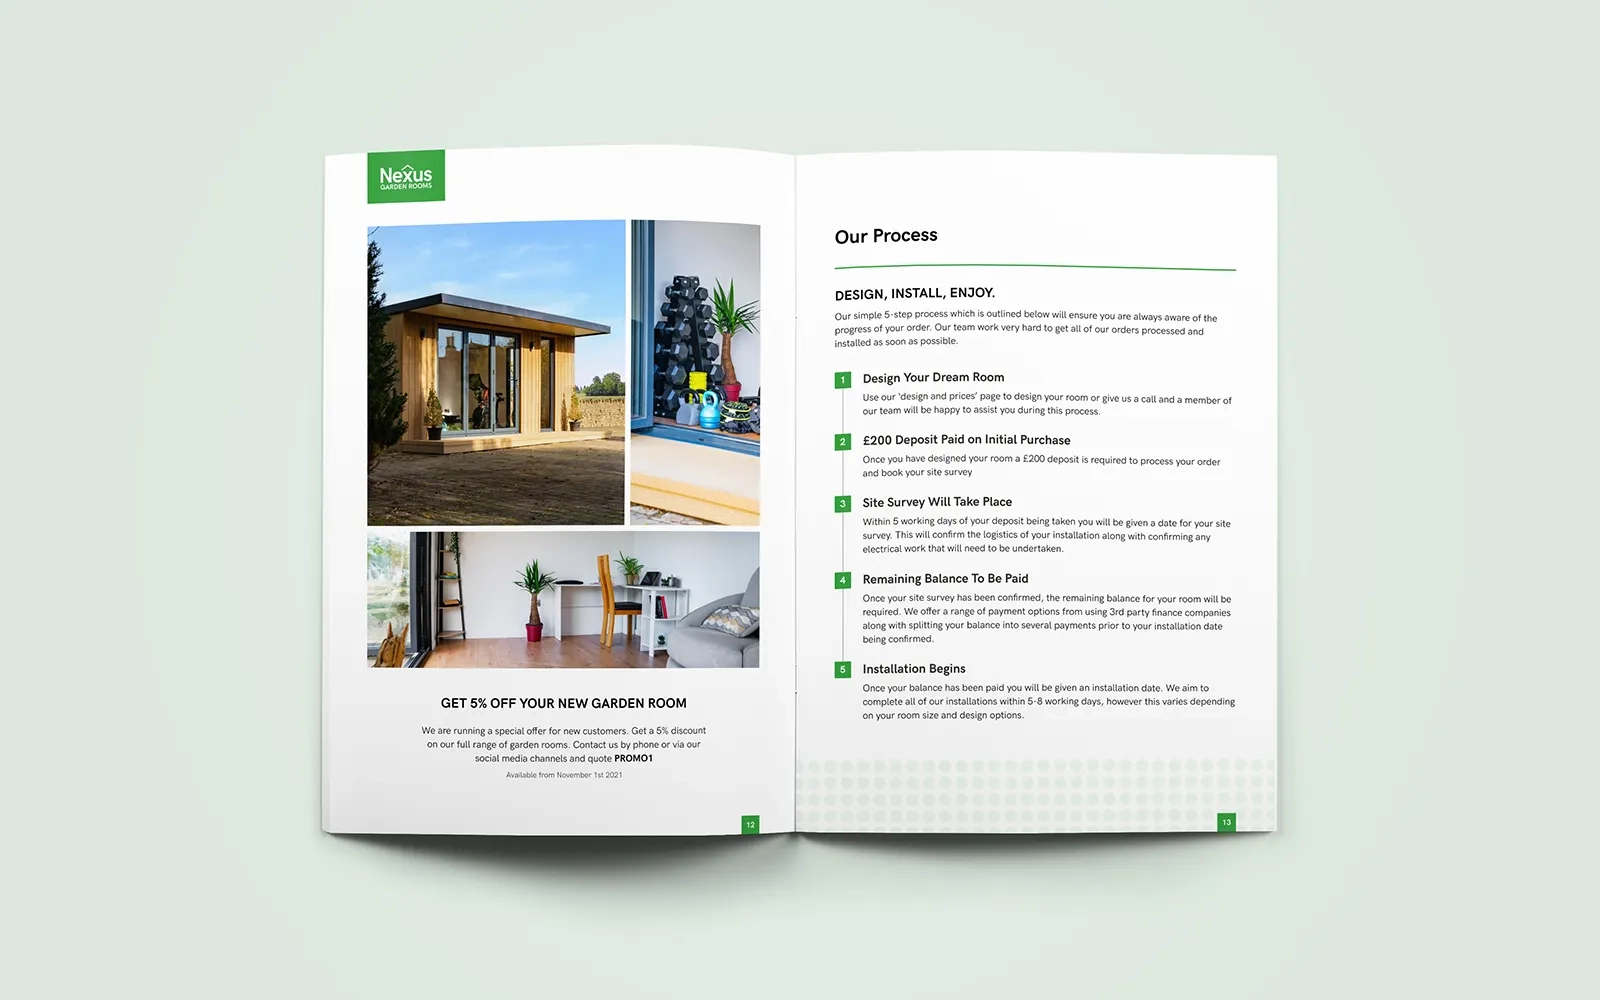  A two page spread of the brochure showing various interior and exterior photos of garden rooms and the company's process for placing an order